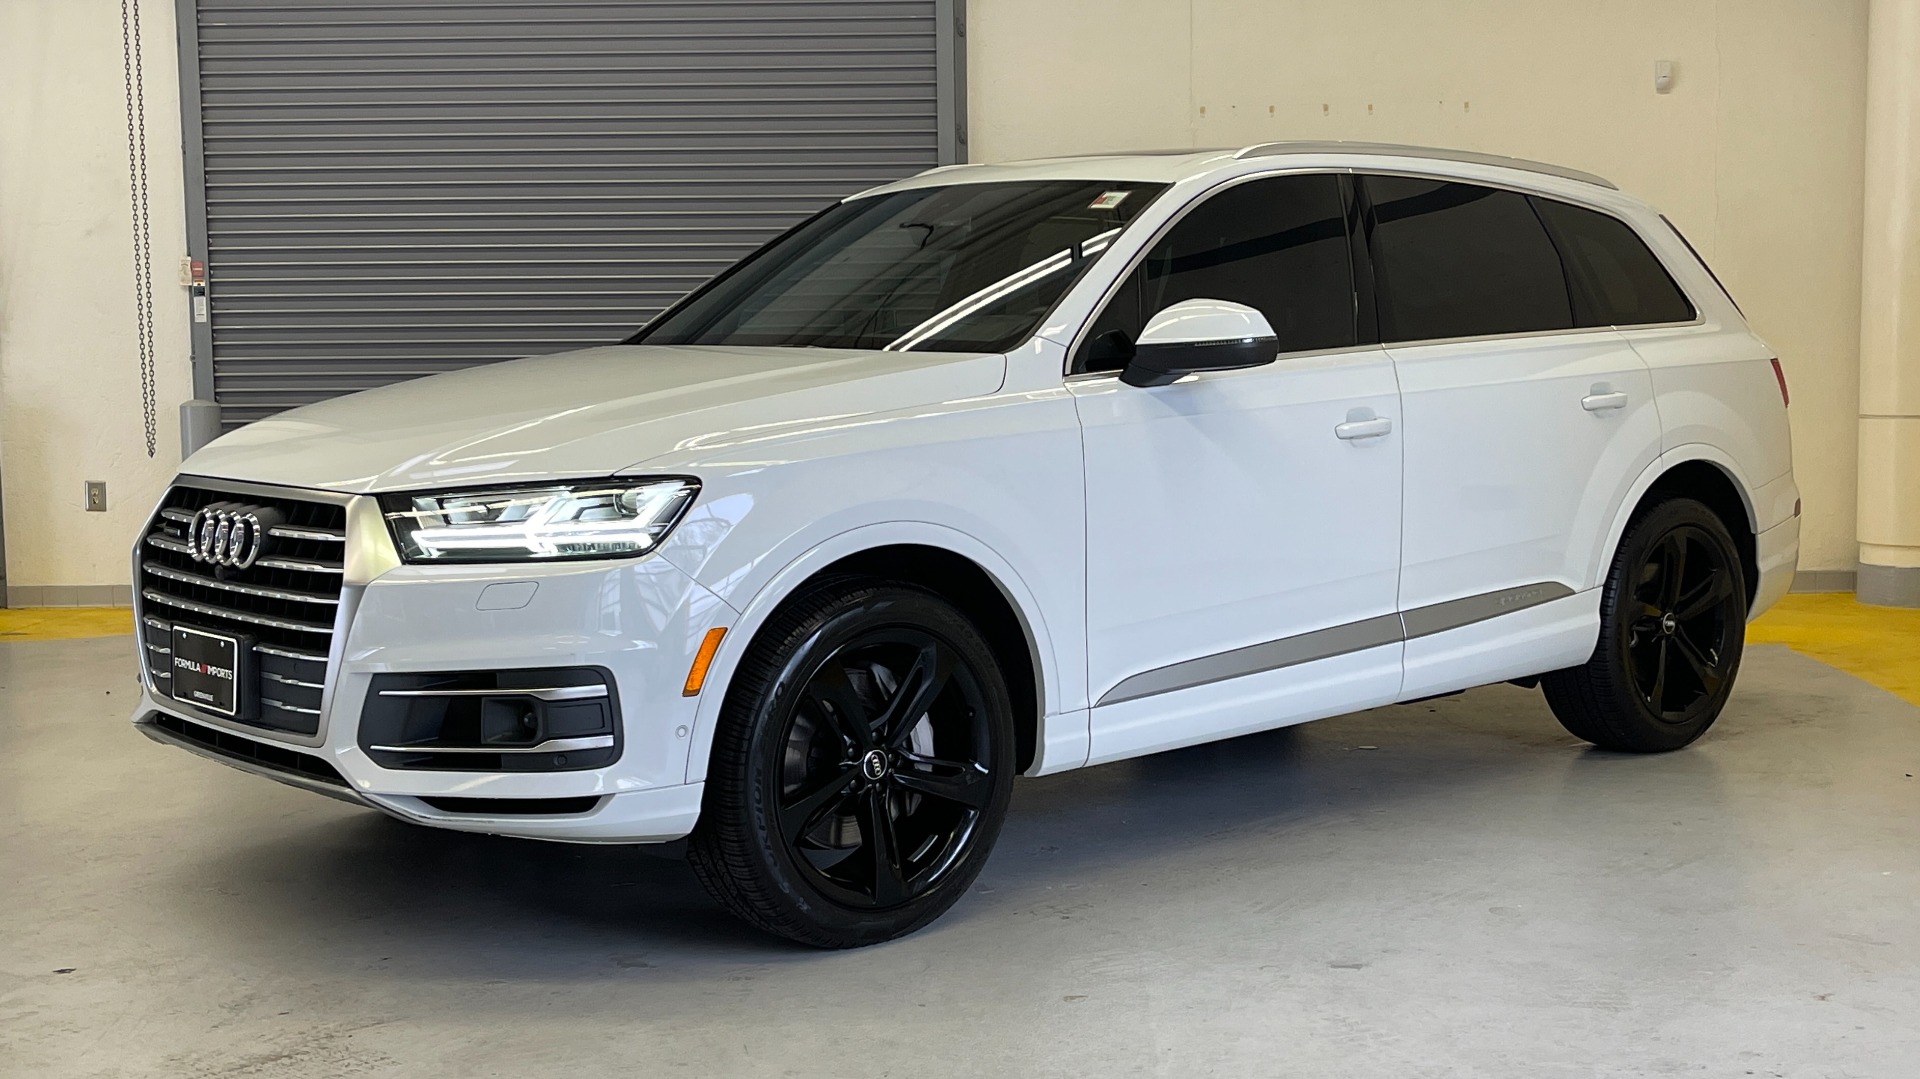 Used 2019 Audi Q7 PRESTIGE / NAV / SUNROOF / LANE ASST / TOWING / 21-IN WHLS / REA for sale $50,995 at Formula Imports in Charlotte NC 28227 3